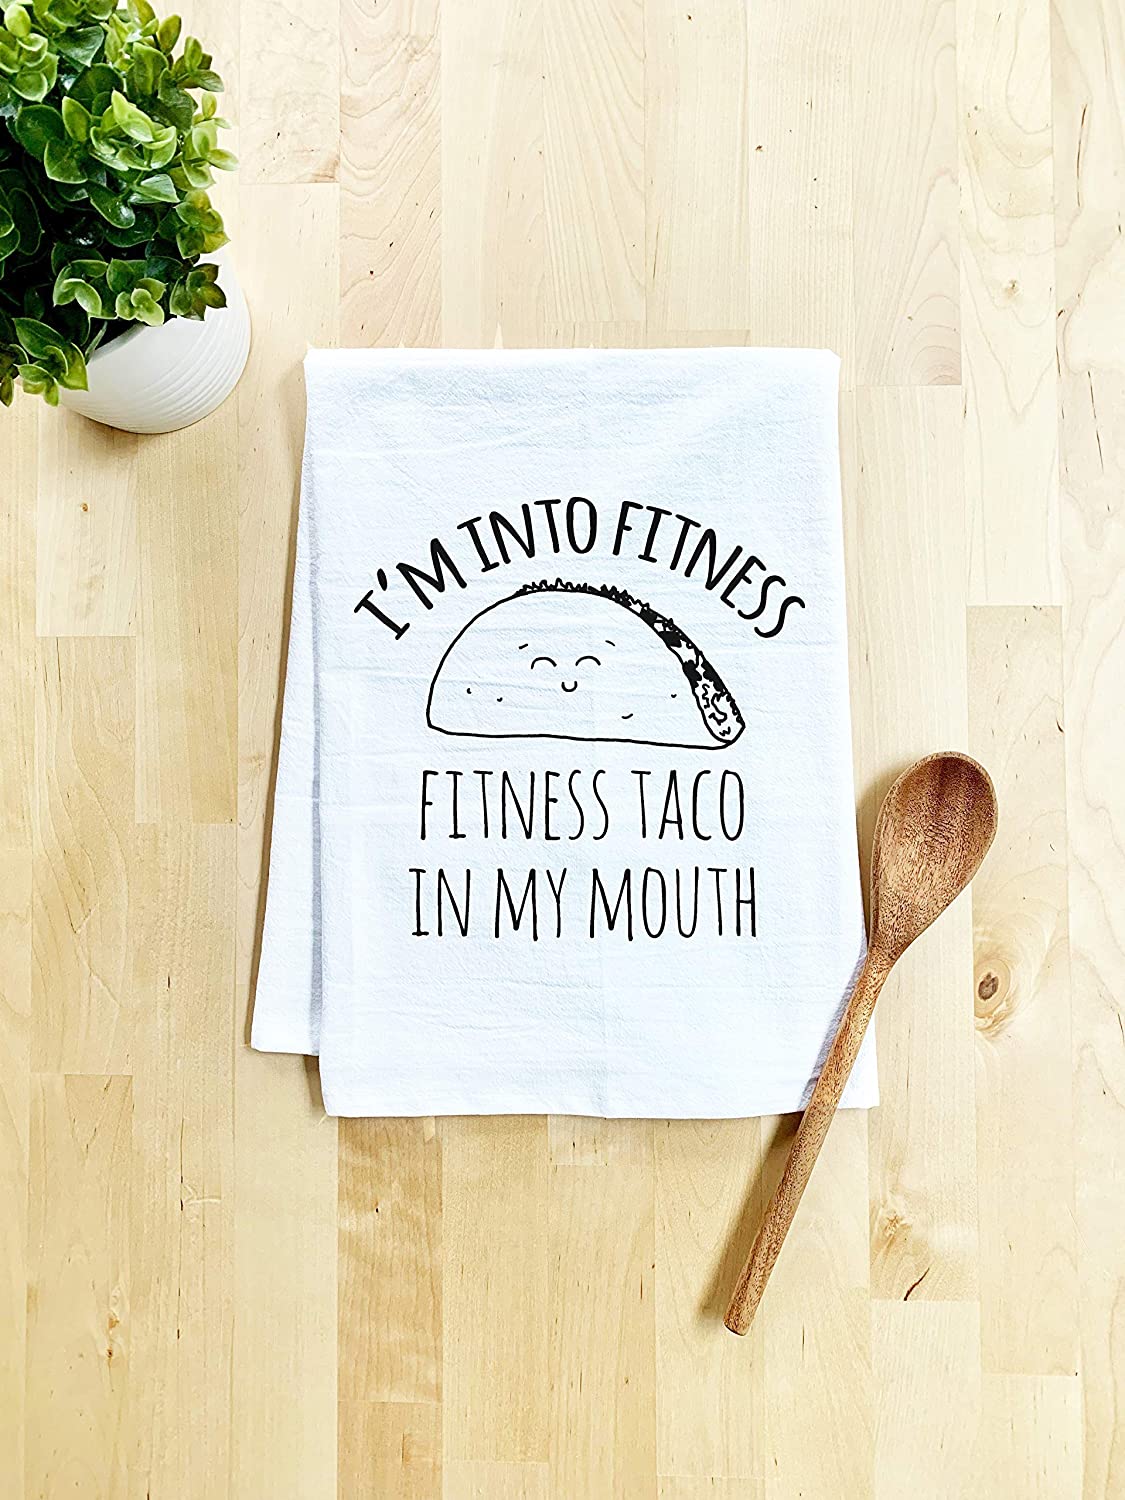 12 Funny Kitchen Towels That Are Perfect for Entertaining Guests